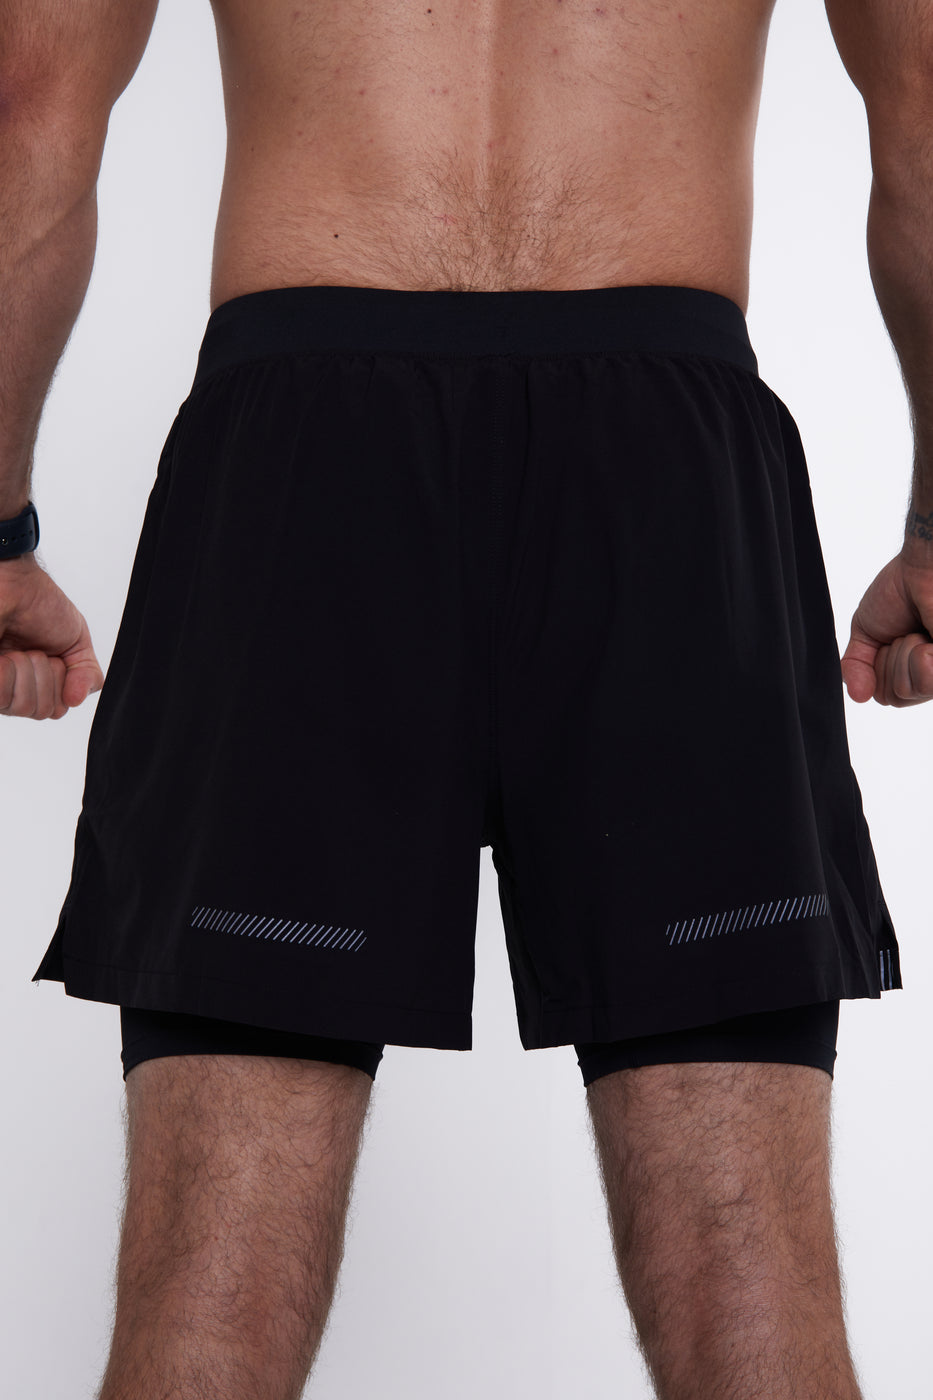 Body Prox Protective Mens Size M Black Shorts